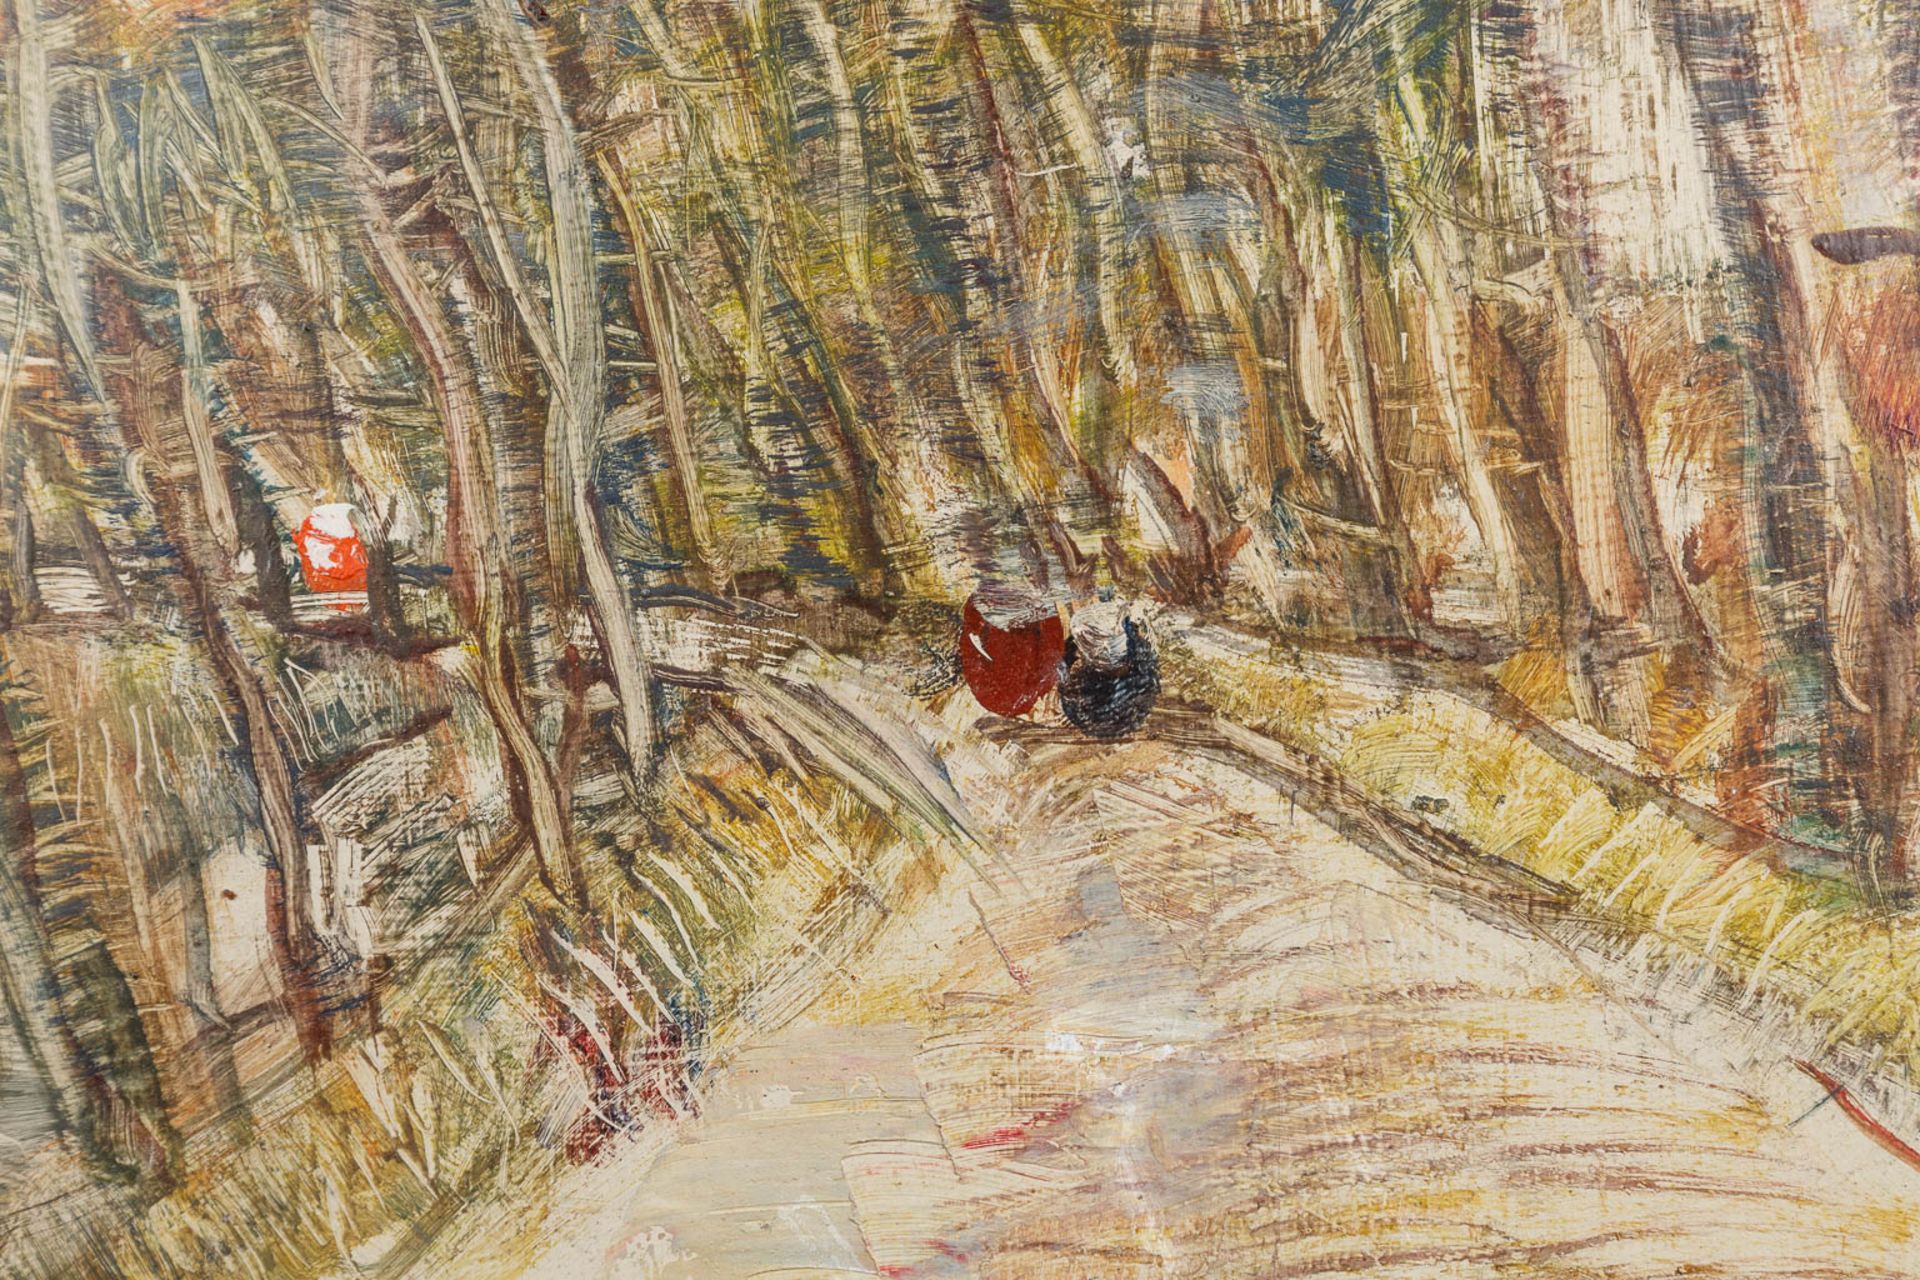 Alfons BLOMME (1889-1979) 'View of a road' oil on board. (W: 70 x H: 60 cm) - Image 4 of 6